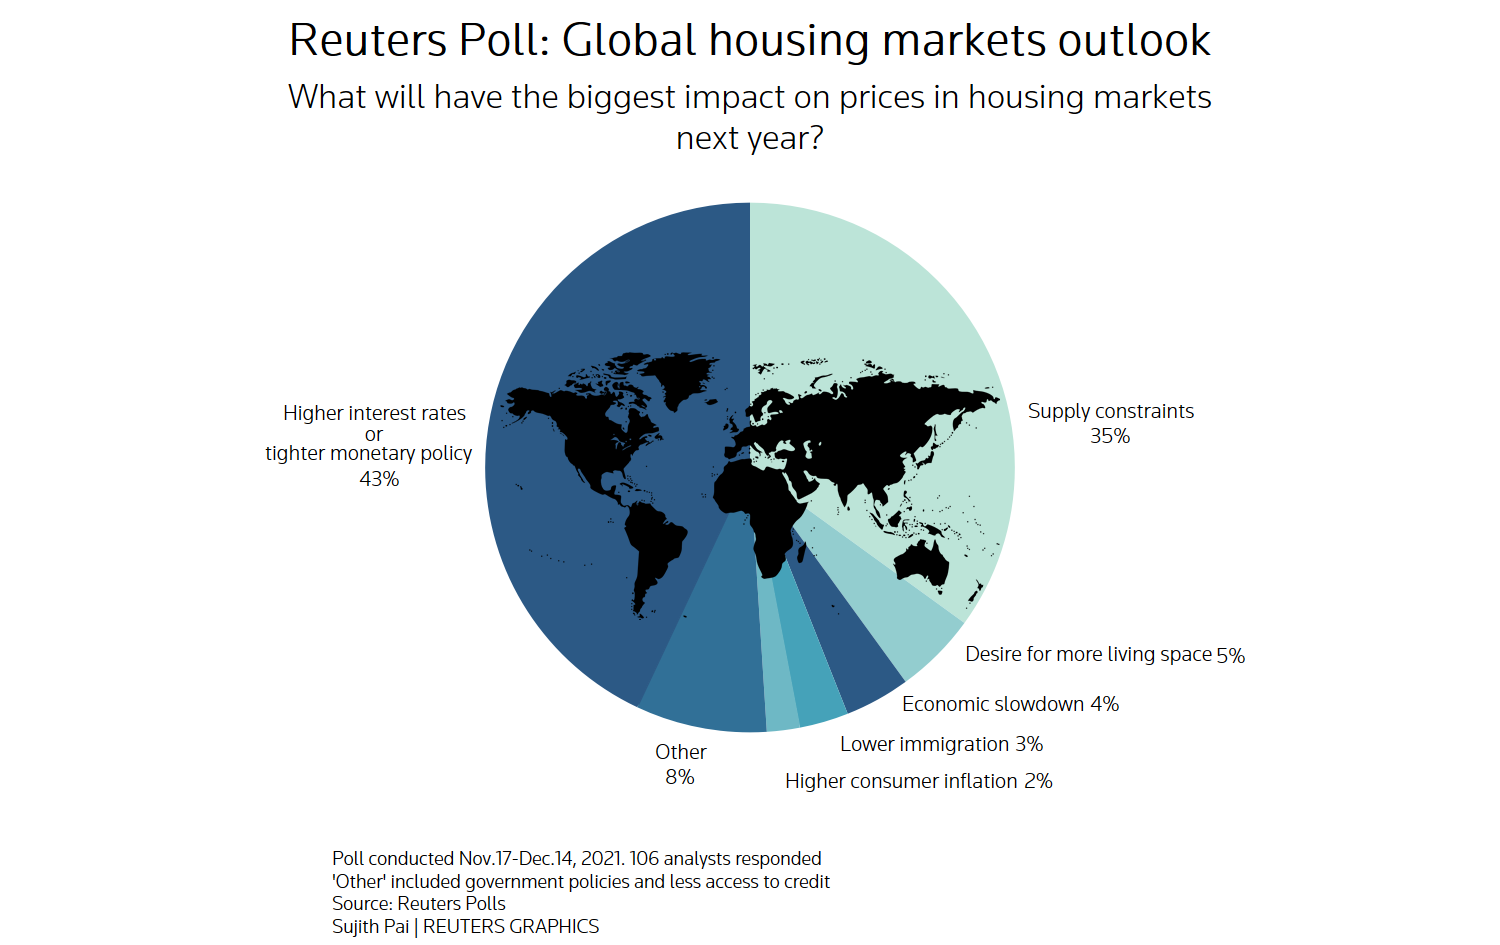 Reuters poll graphic on the global housing markets outlook